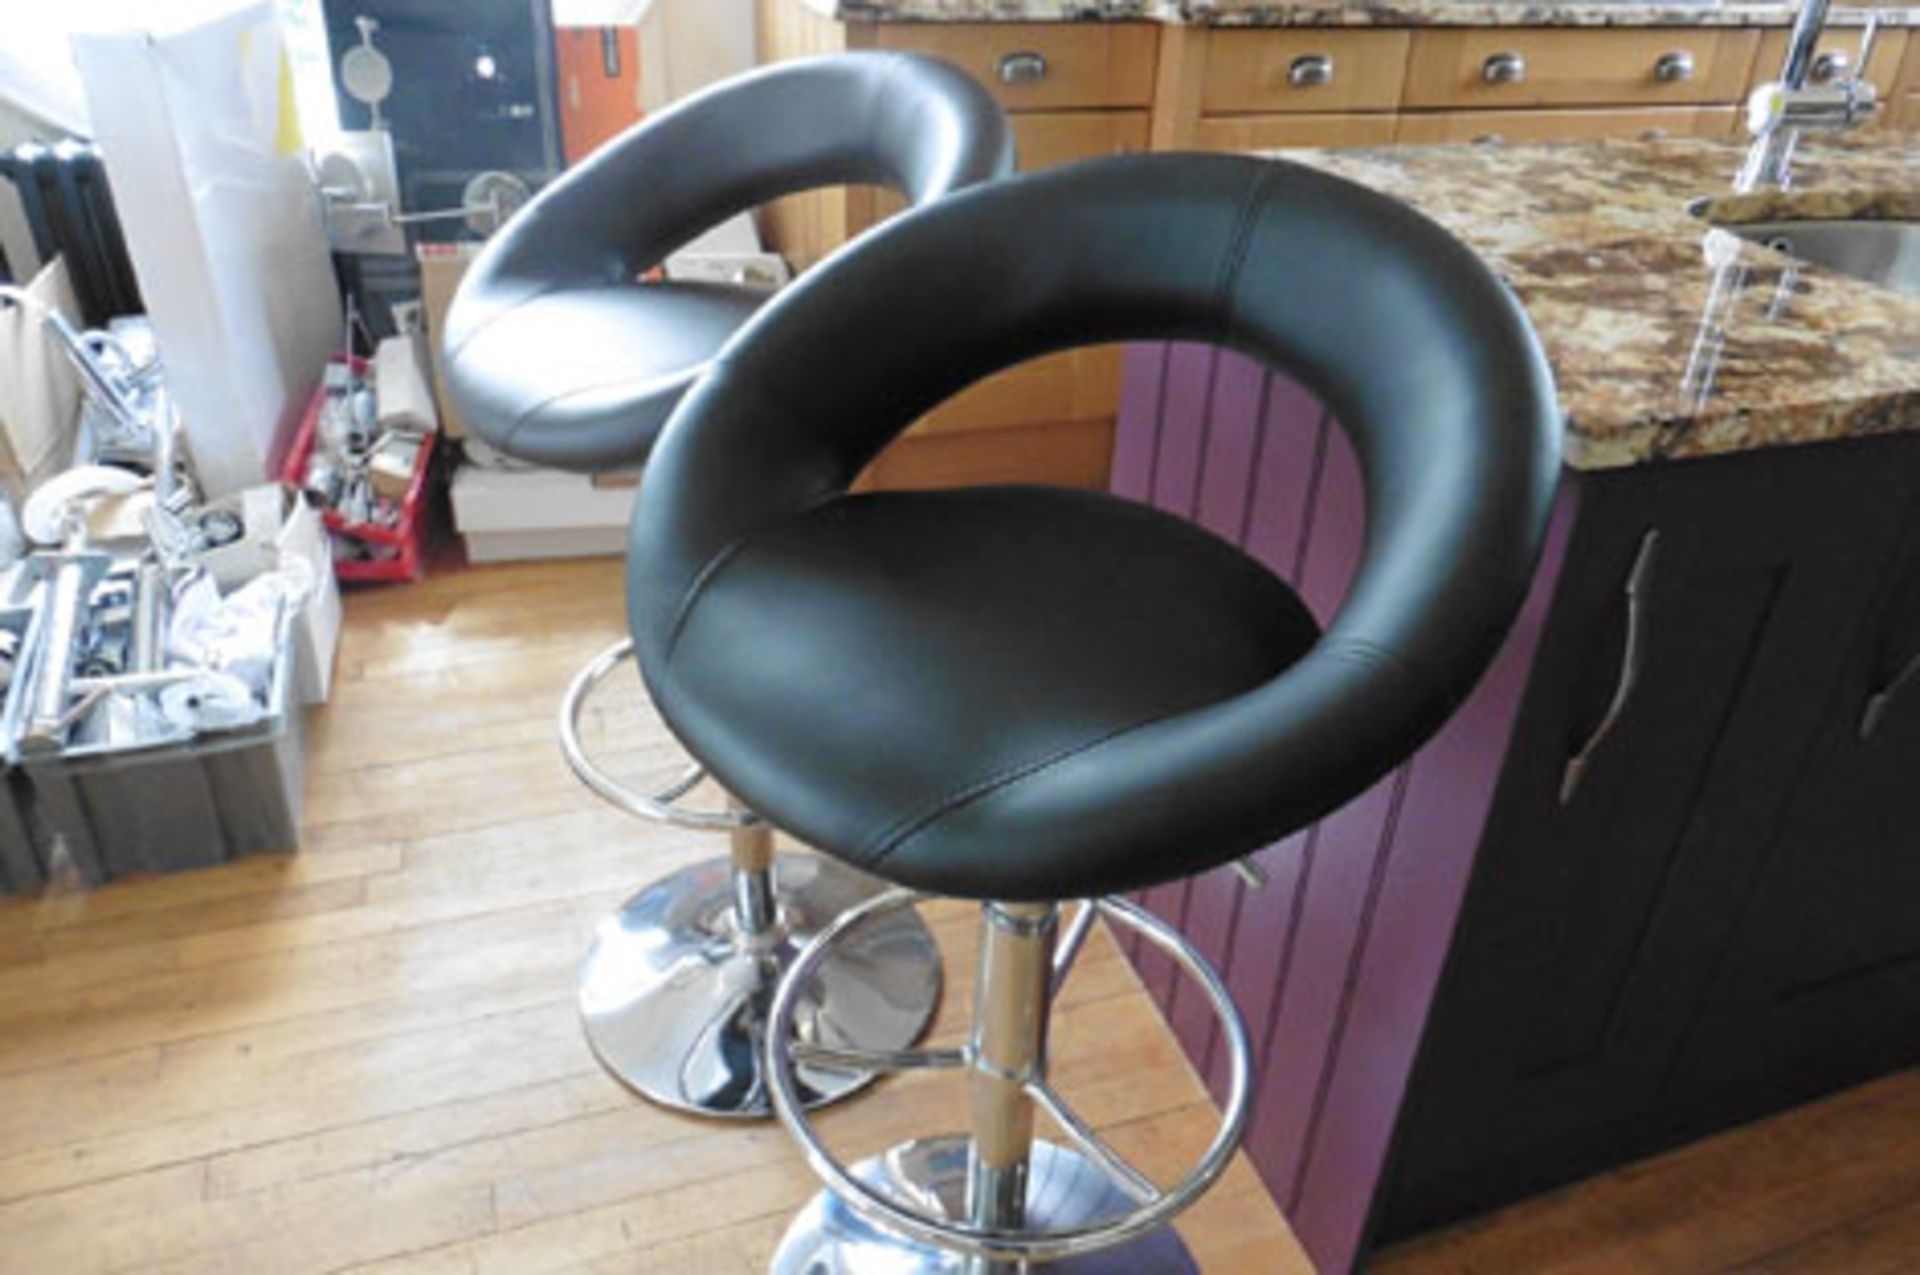 2 leather upholstered and chrome based bar stools with adjustable height (1 chocolate, 1 black) - Image 2 of 2